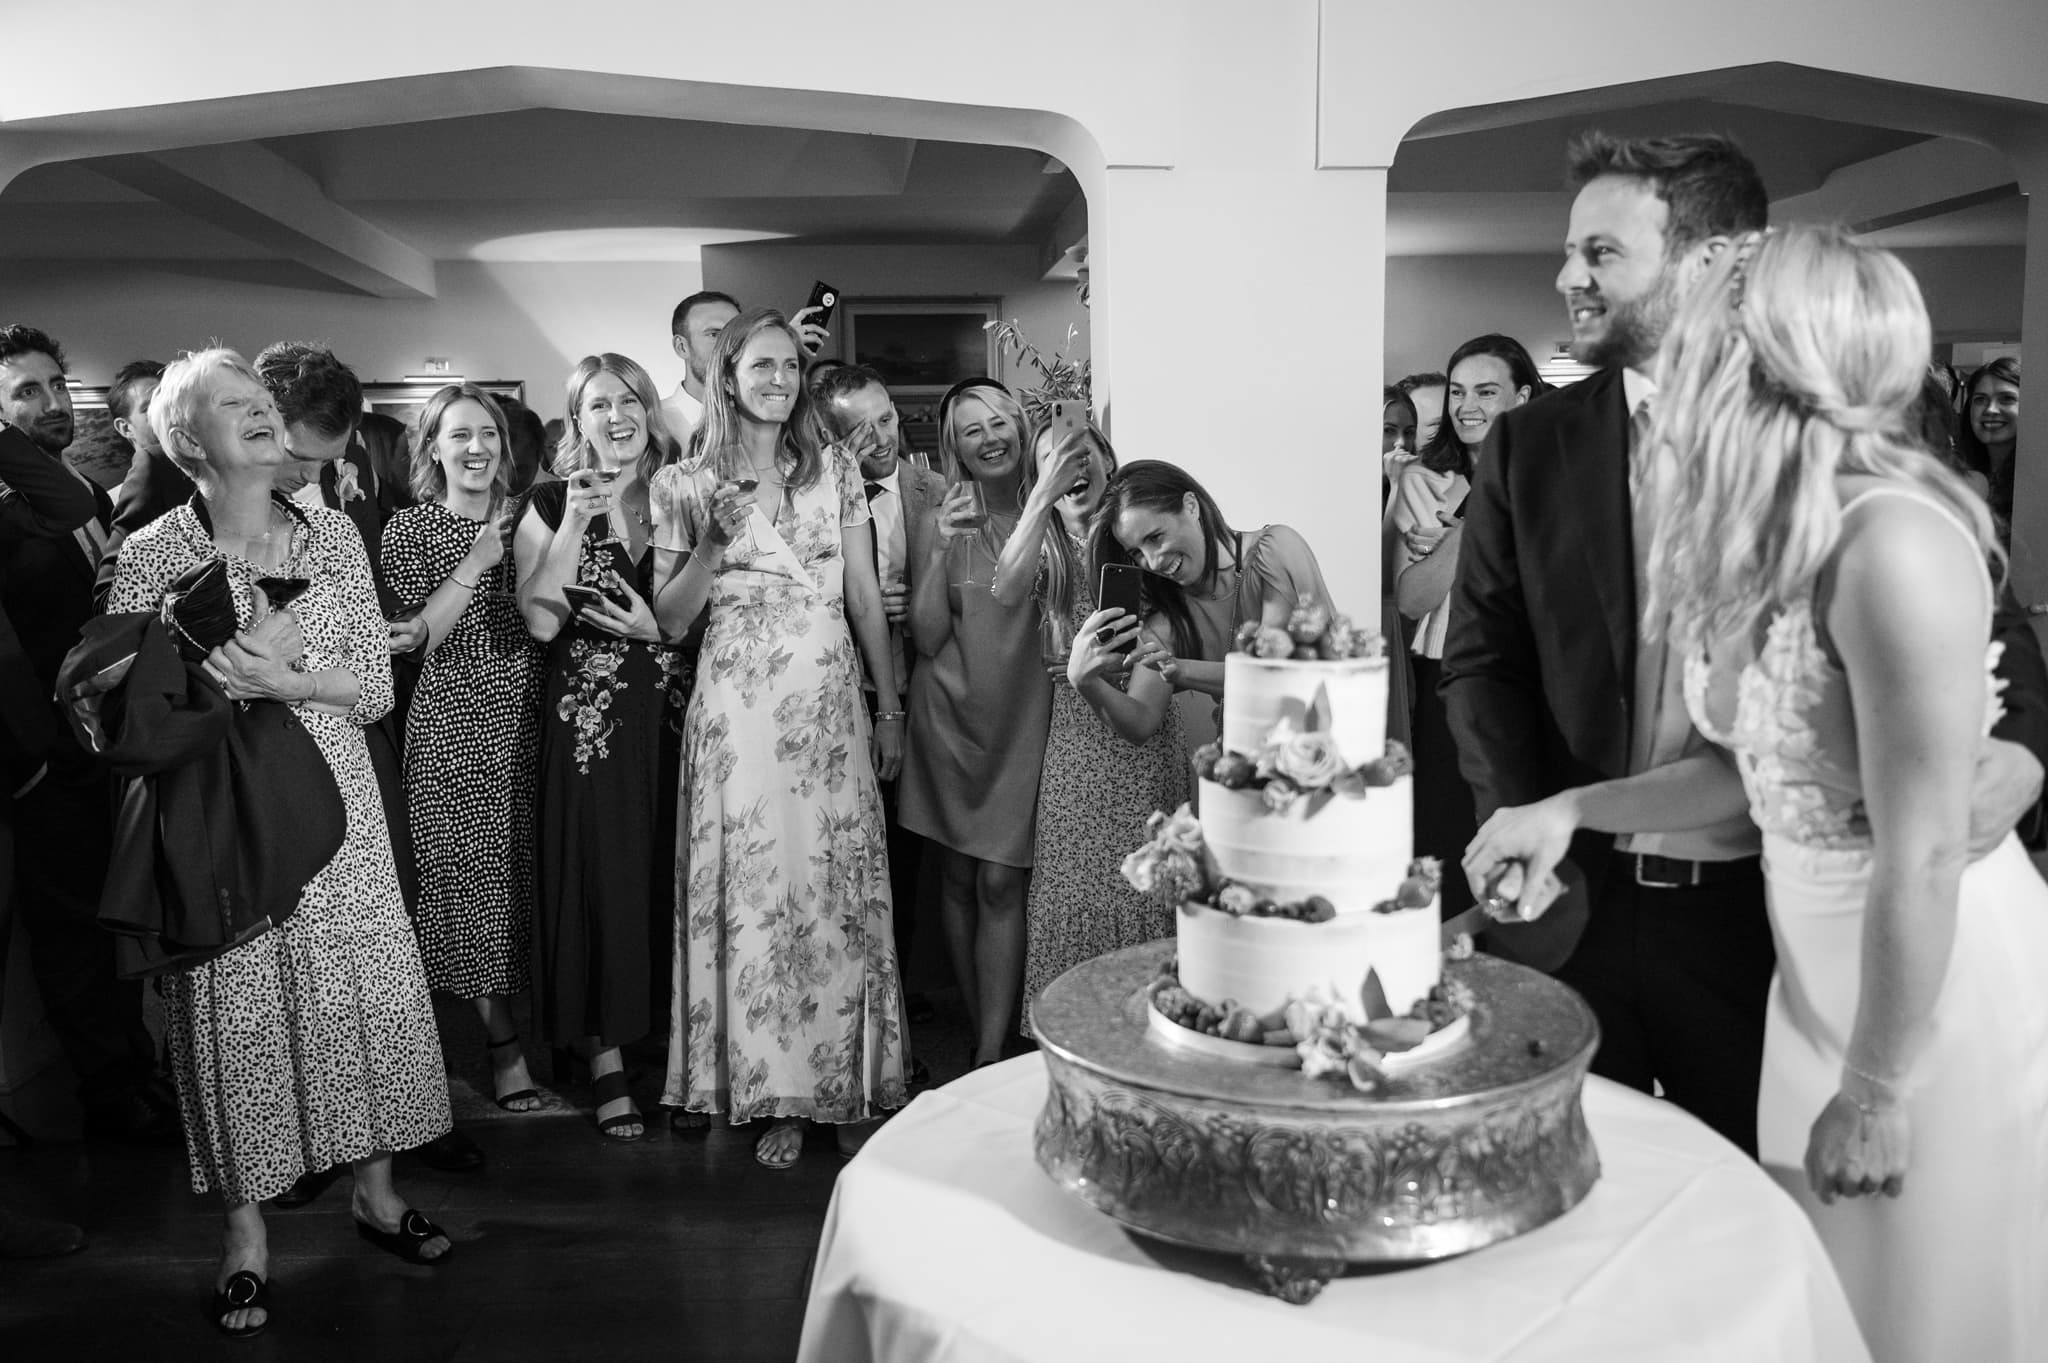 Wedding guests cheering as couple cut cake